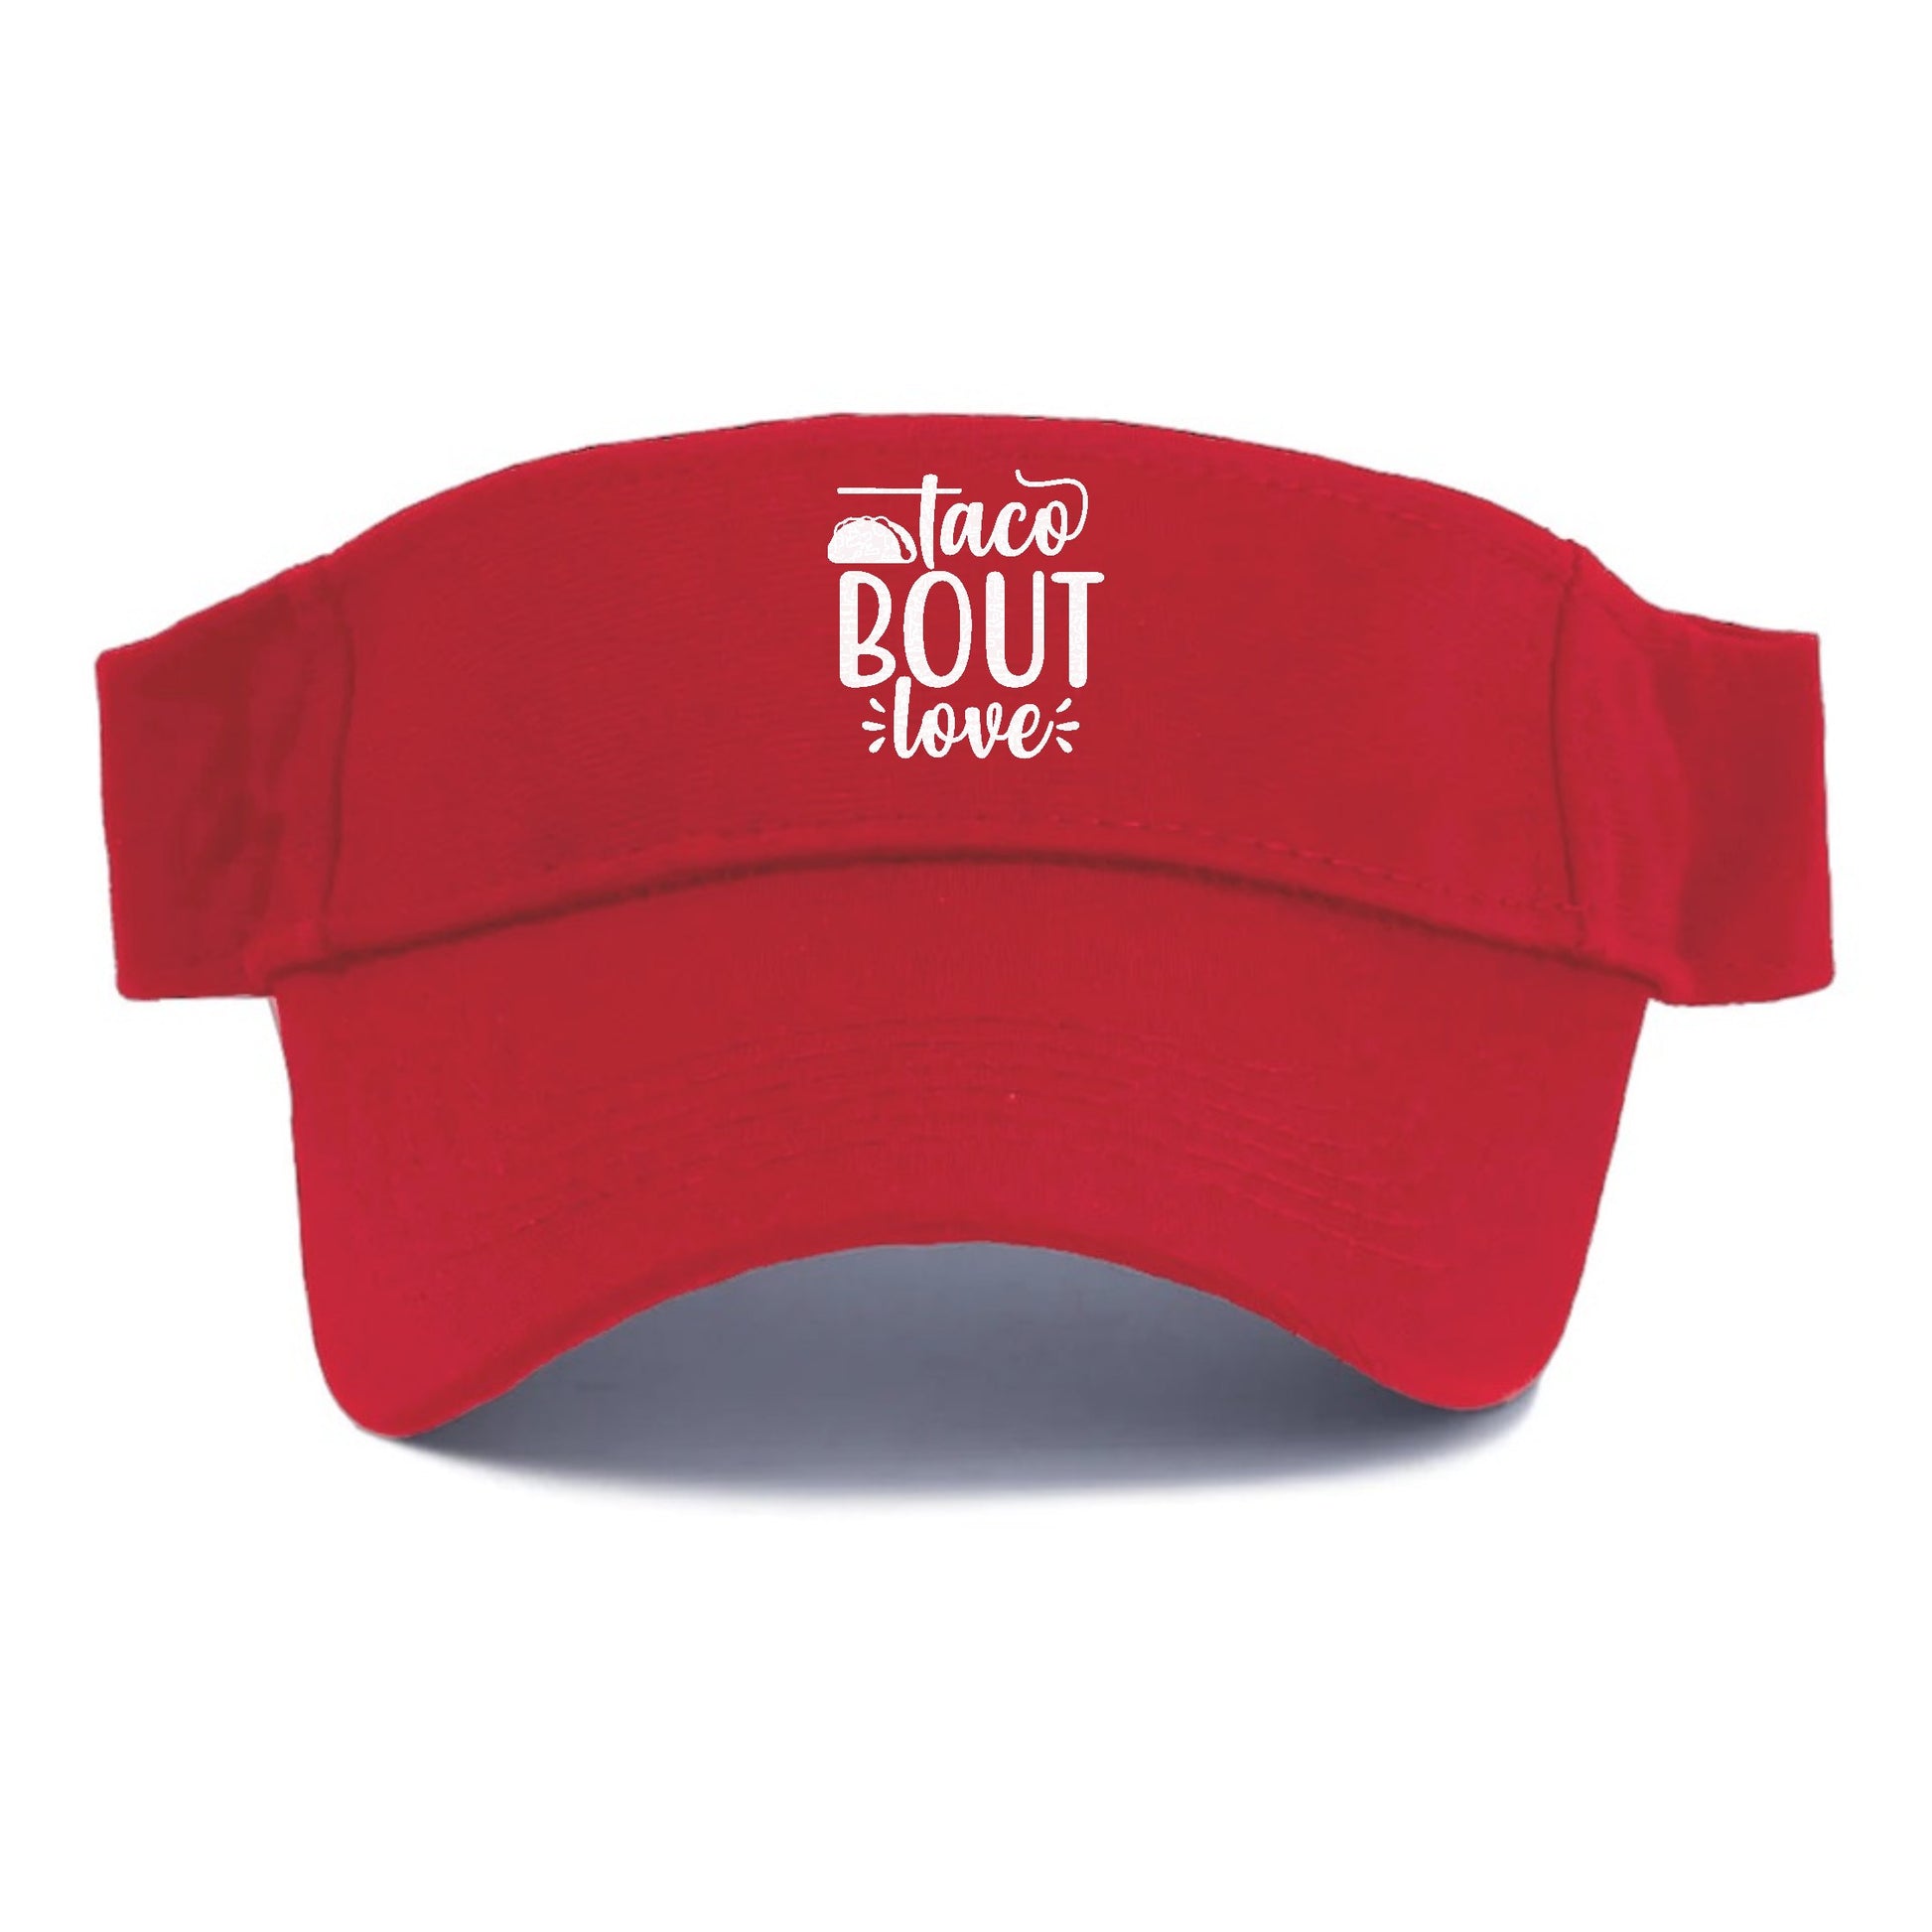 Taco bout love Hat